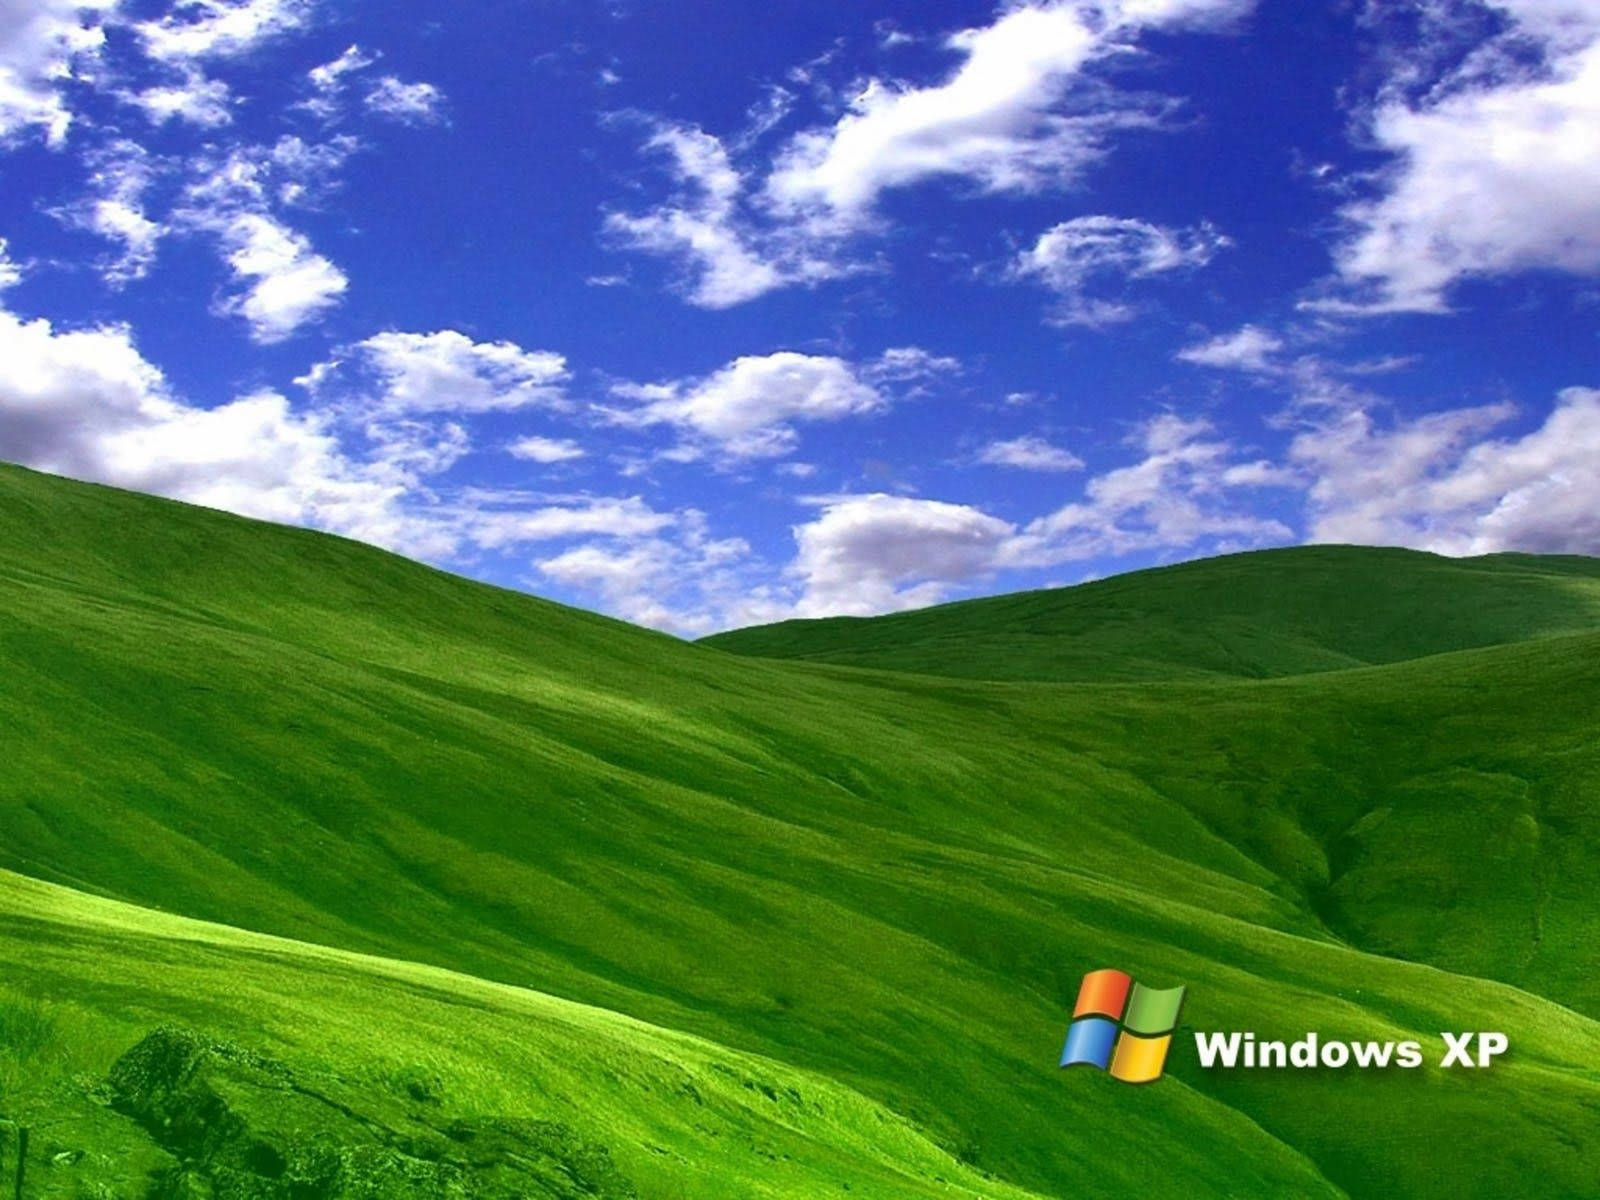 Windows Xp Wallpapers - Hd Wallpapers Background